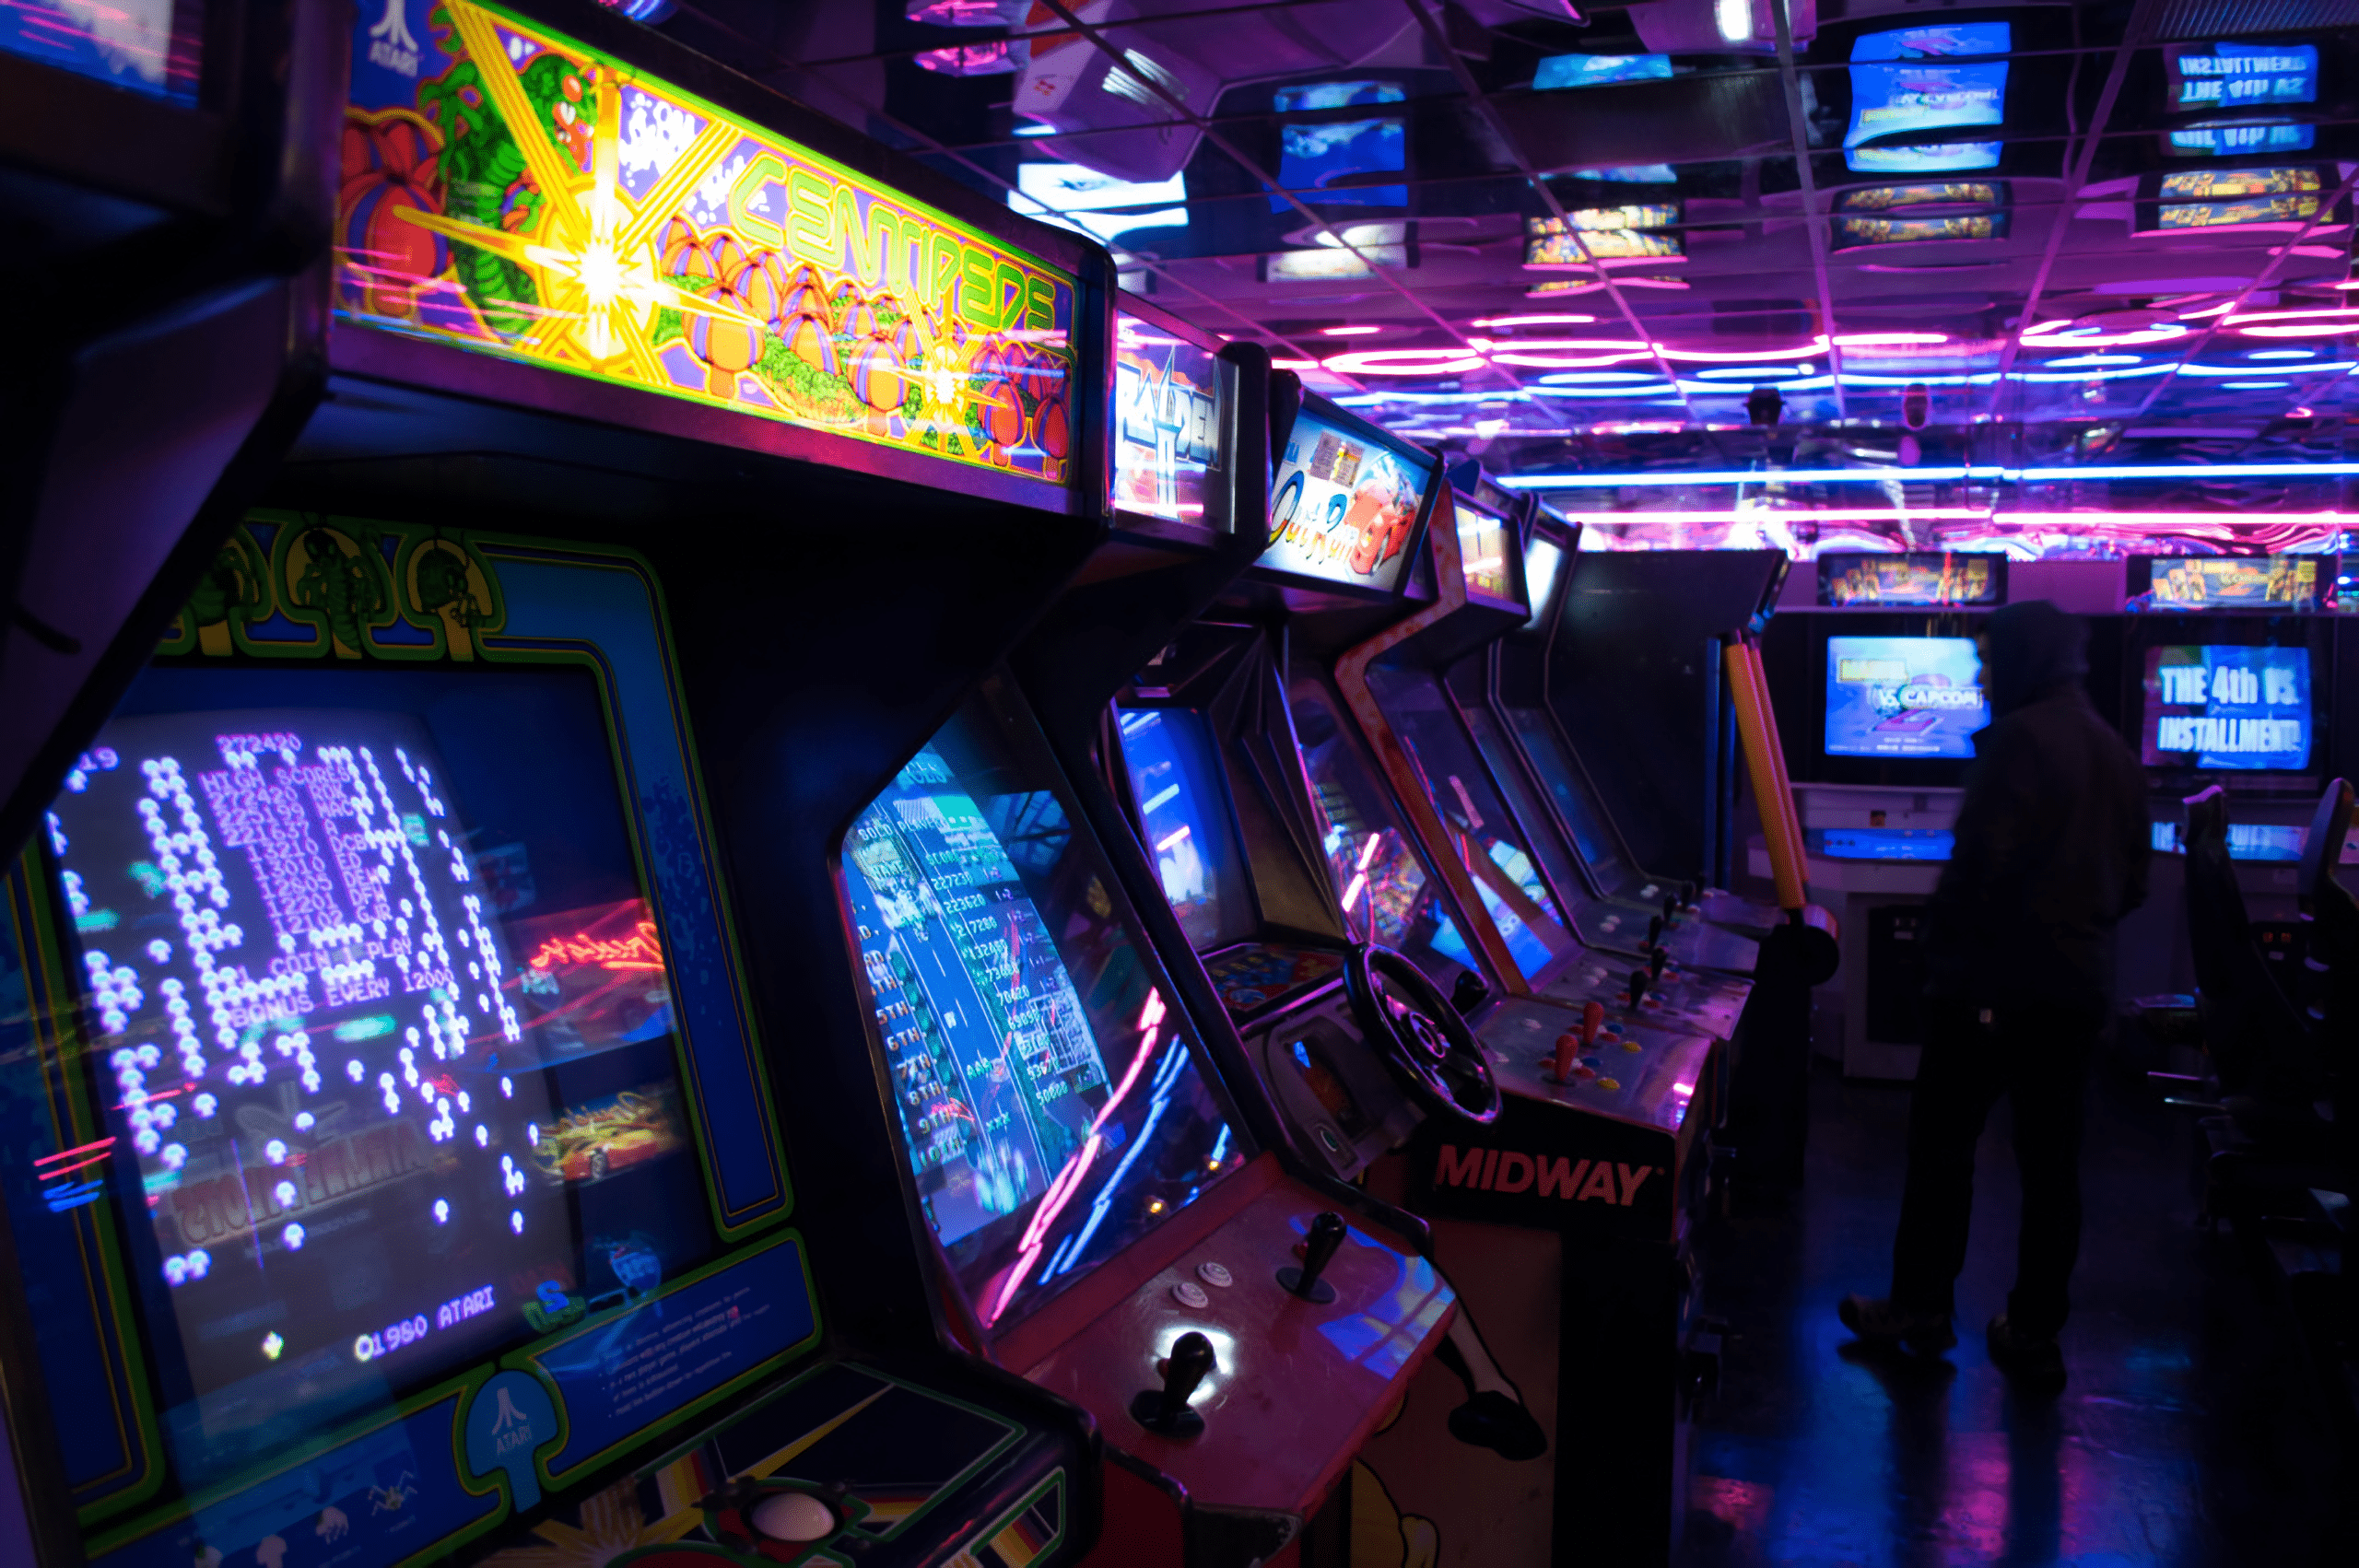 A row of video games are lit up with purple and pink lights. - Arcade